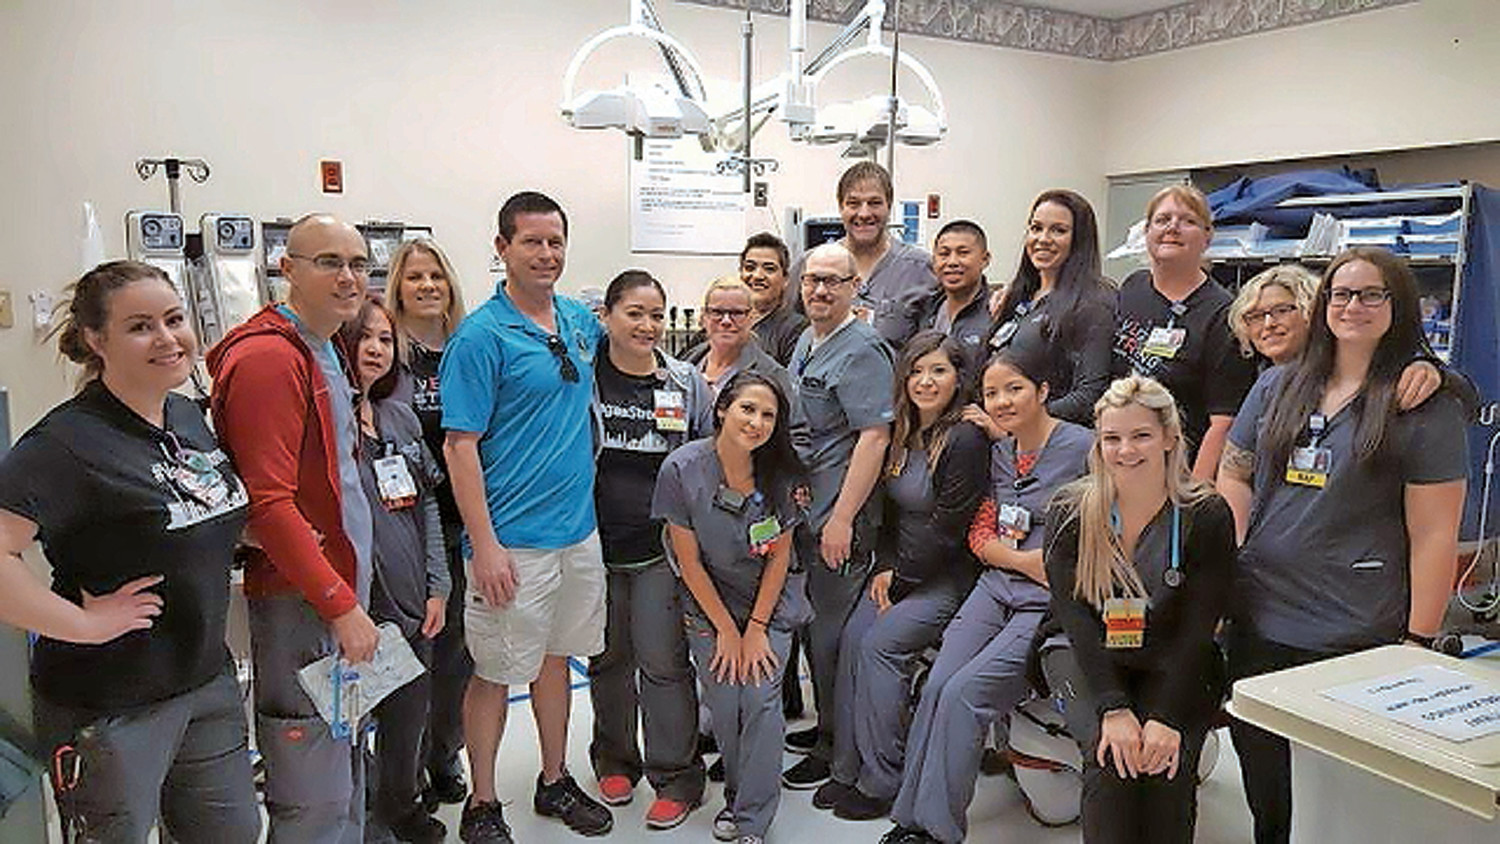 Last November, Maher visited Sunrise Hospital’s Trauma Emergency Unit in Las Vegas, where many victims and survivors were brought after the deadliest mass shooting in American history. He bought them lunch in honor of Charleston Hartfield, a Las Vegas police officer.